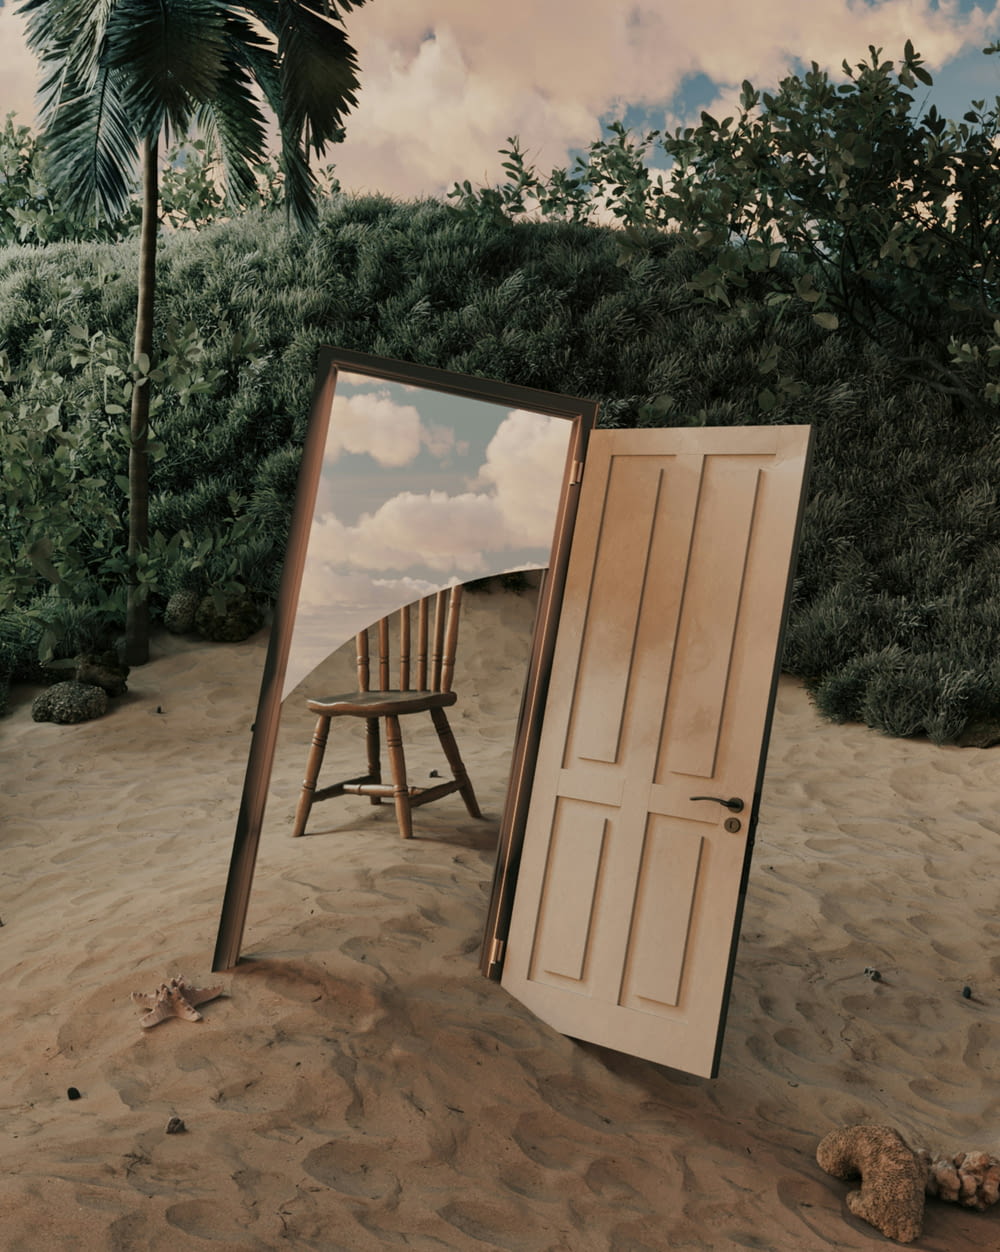 a wooden chair sitting in the sand next to a mirror